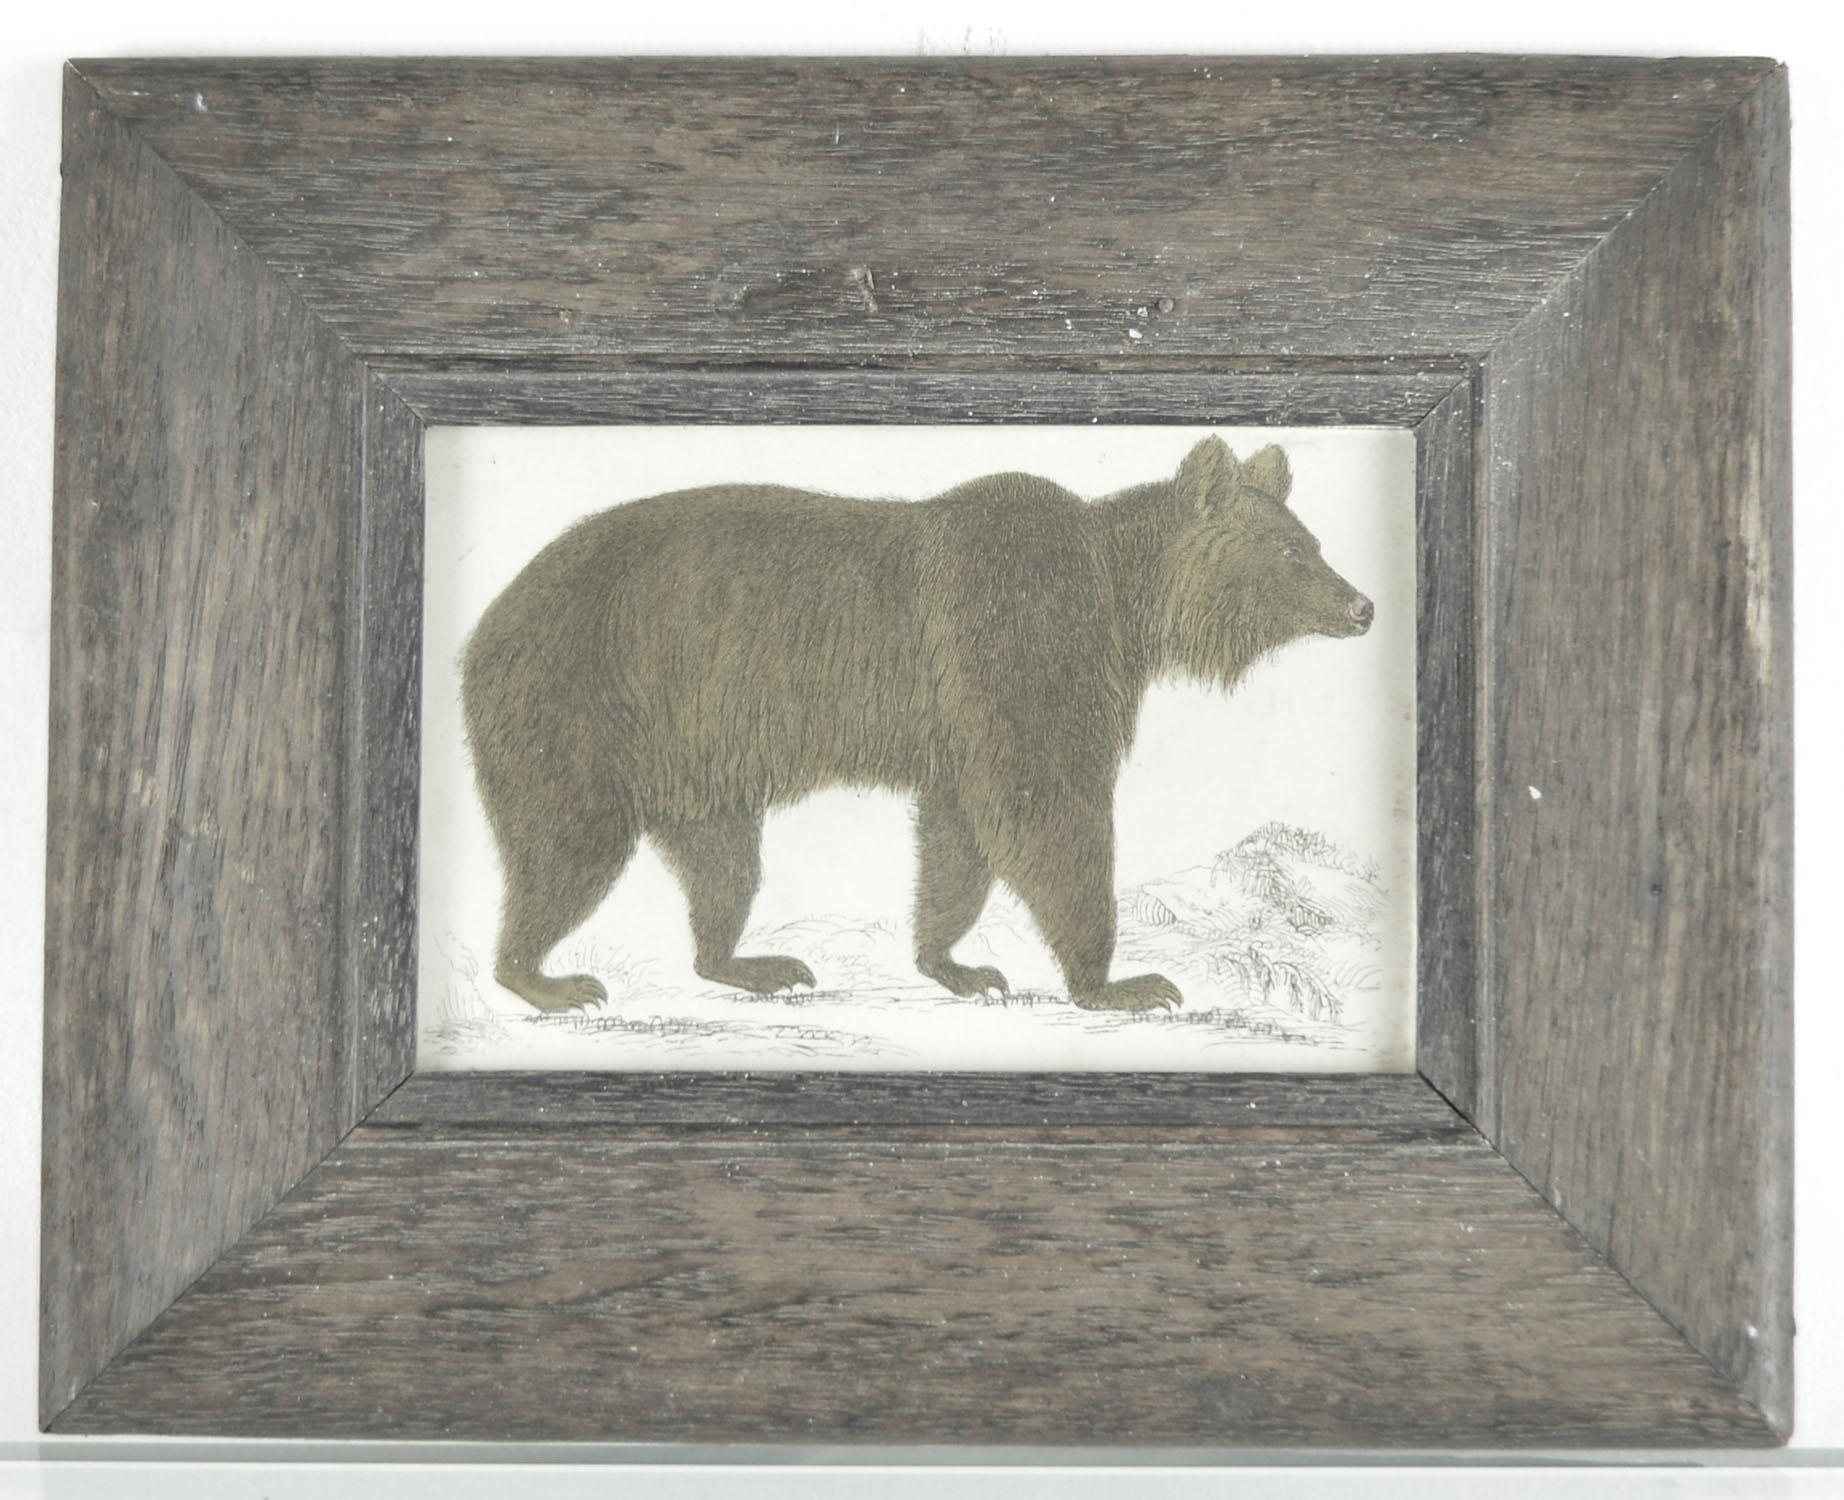 Great image of a brown bear presented in an antique distressed oak frame.

Original hand colored lithograph after Cpt. Brown.

Published by Fullerton, 1847.

 